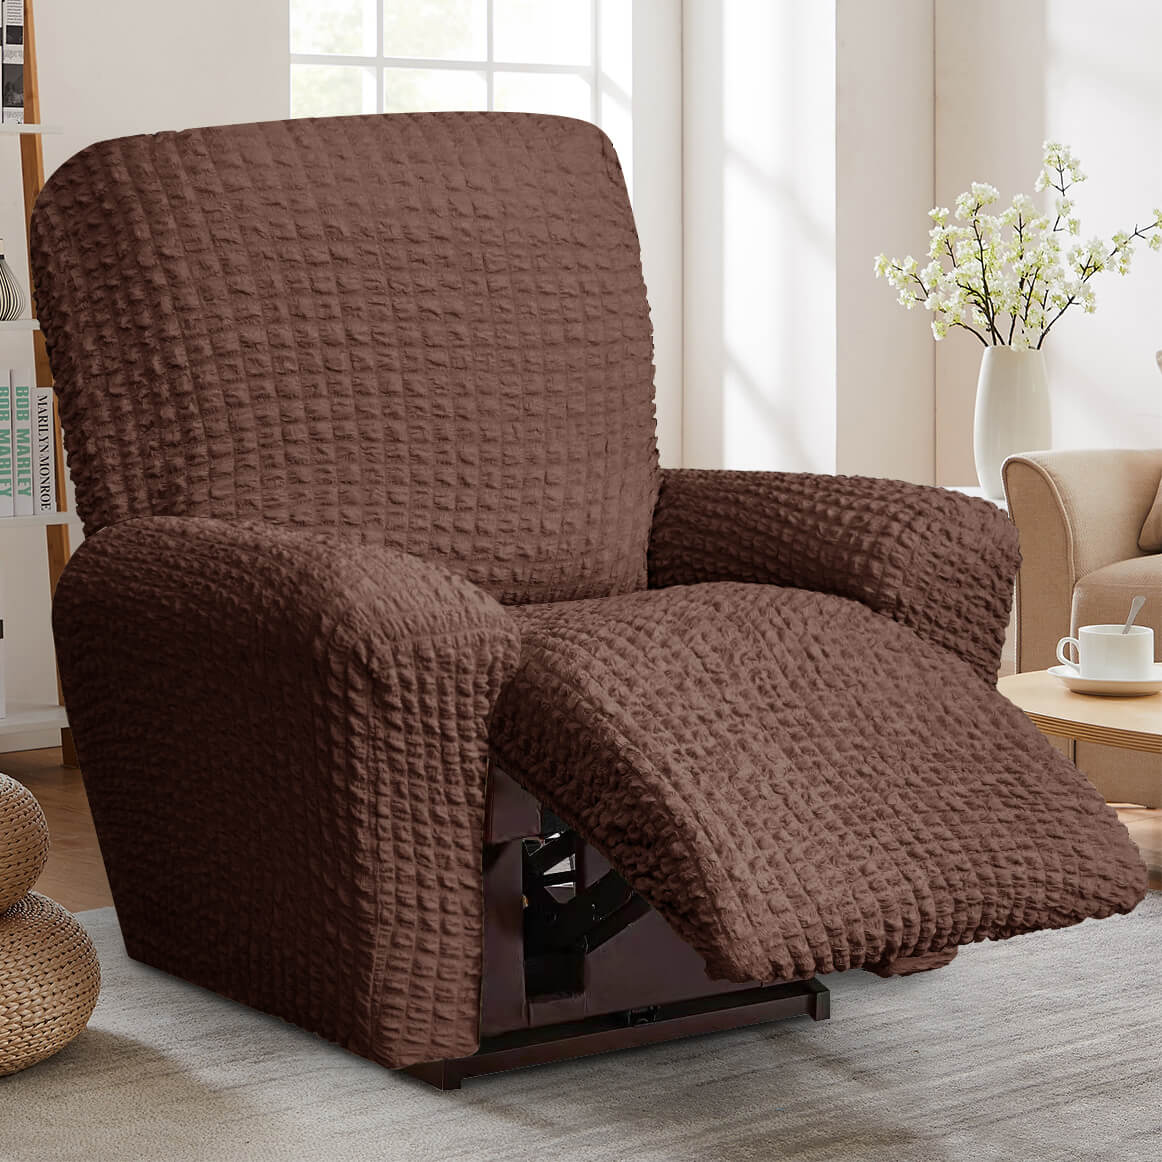 Crfatop High Quality Recliner Seater Cover Seersucker Fabric Reclining Couch Cover ChairBrown